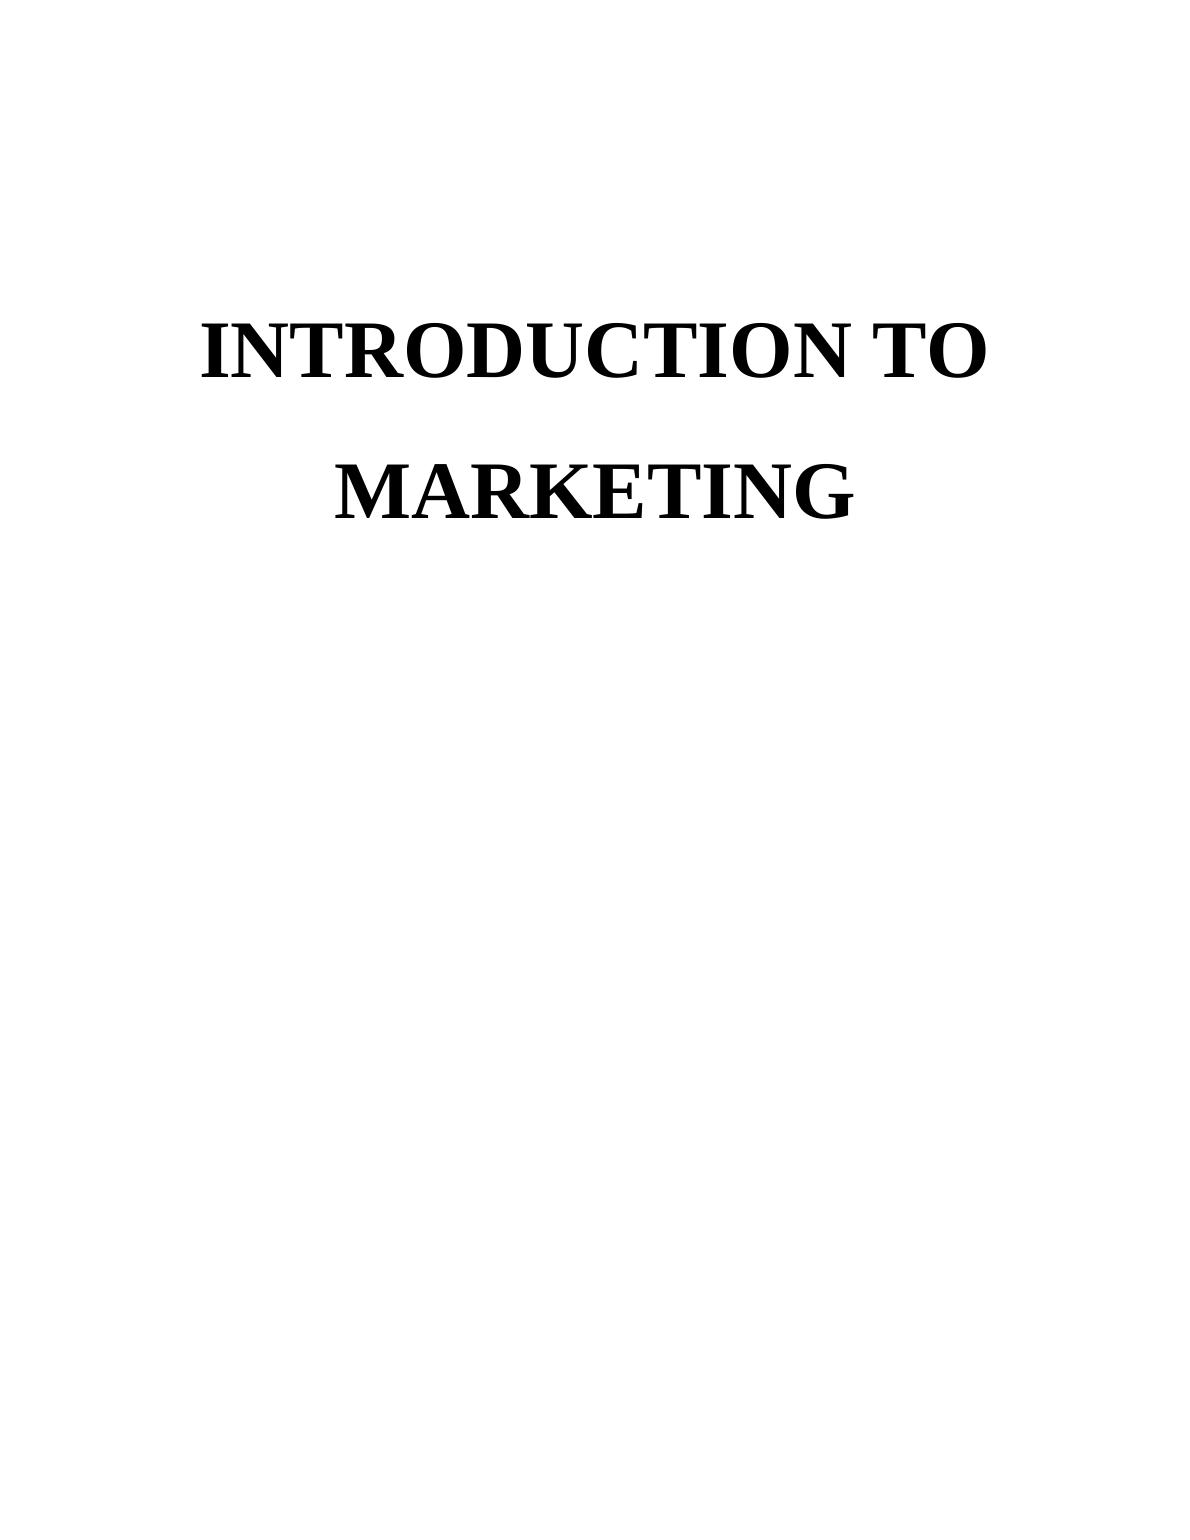 Introduction to Marketing - Toyota_1